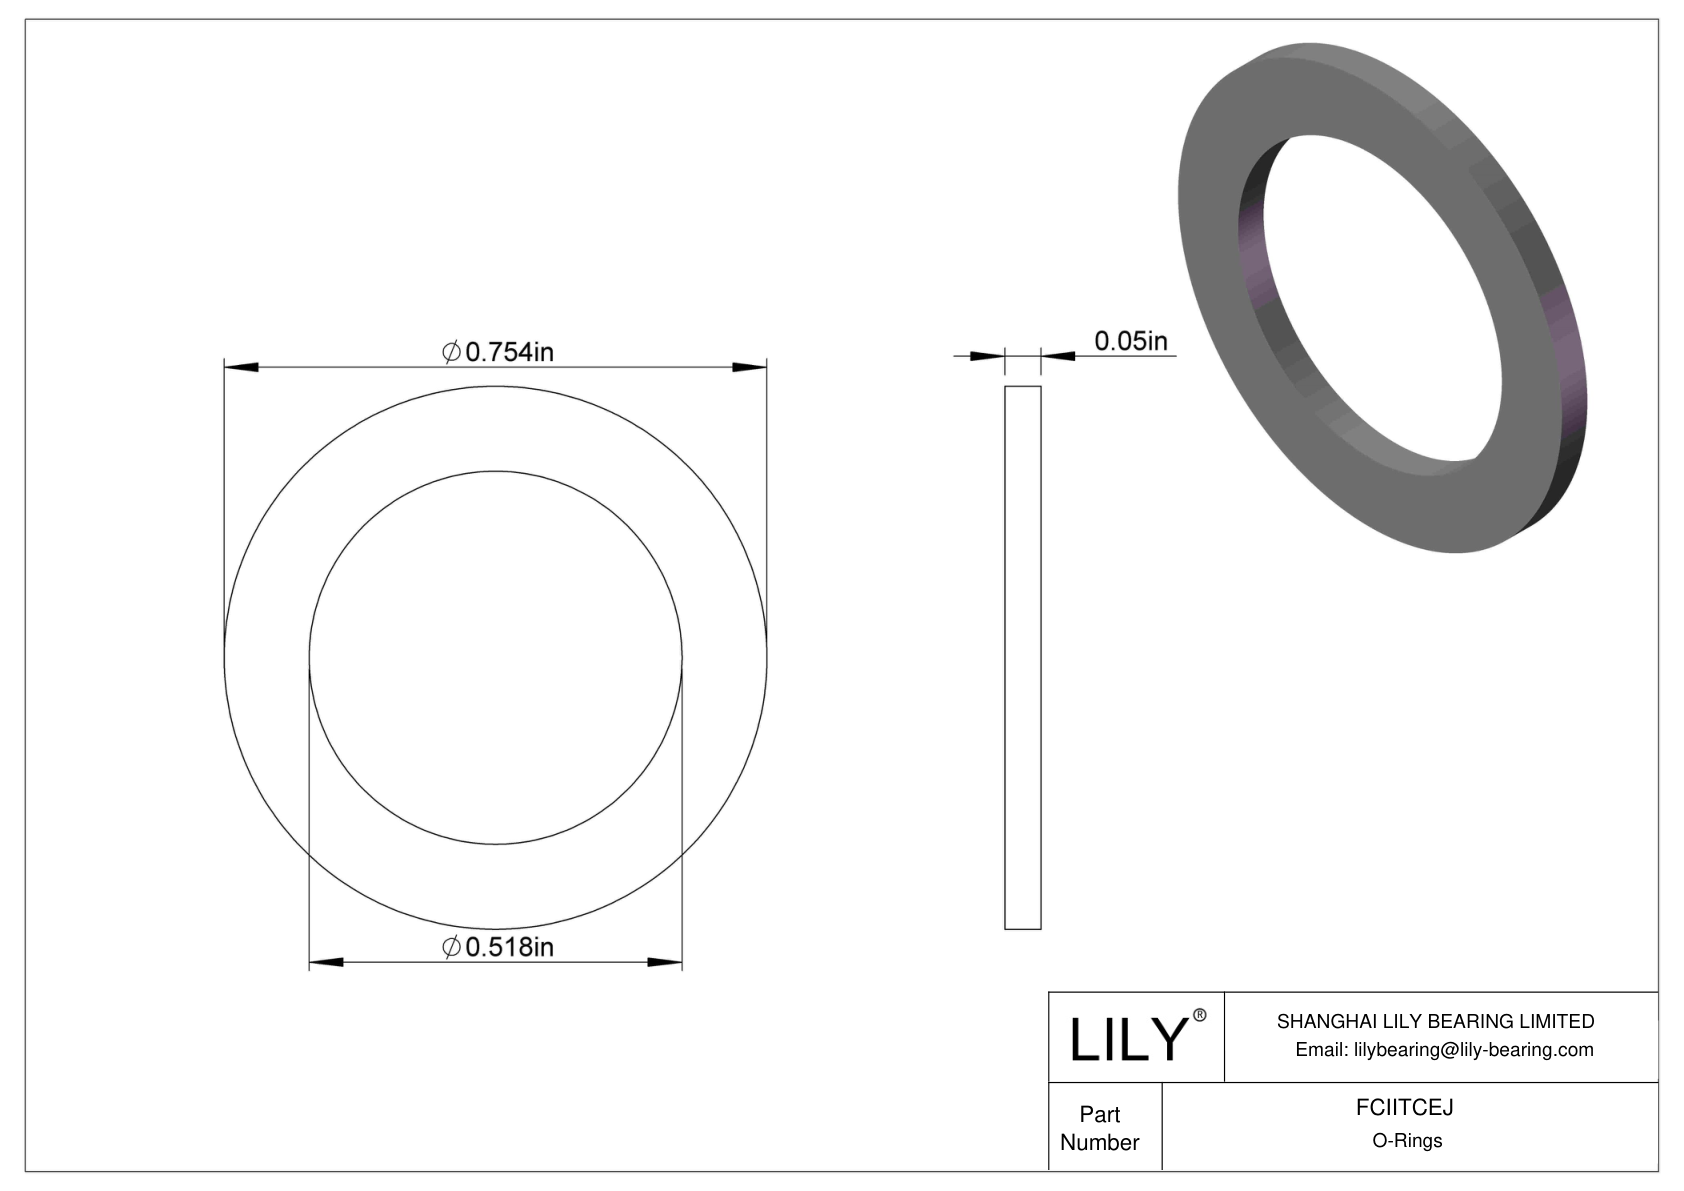 FCIITCEJ O-Ring Backup Rings cad drawing